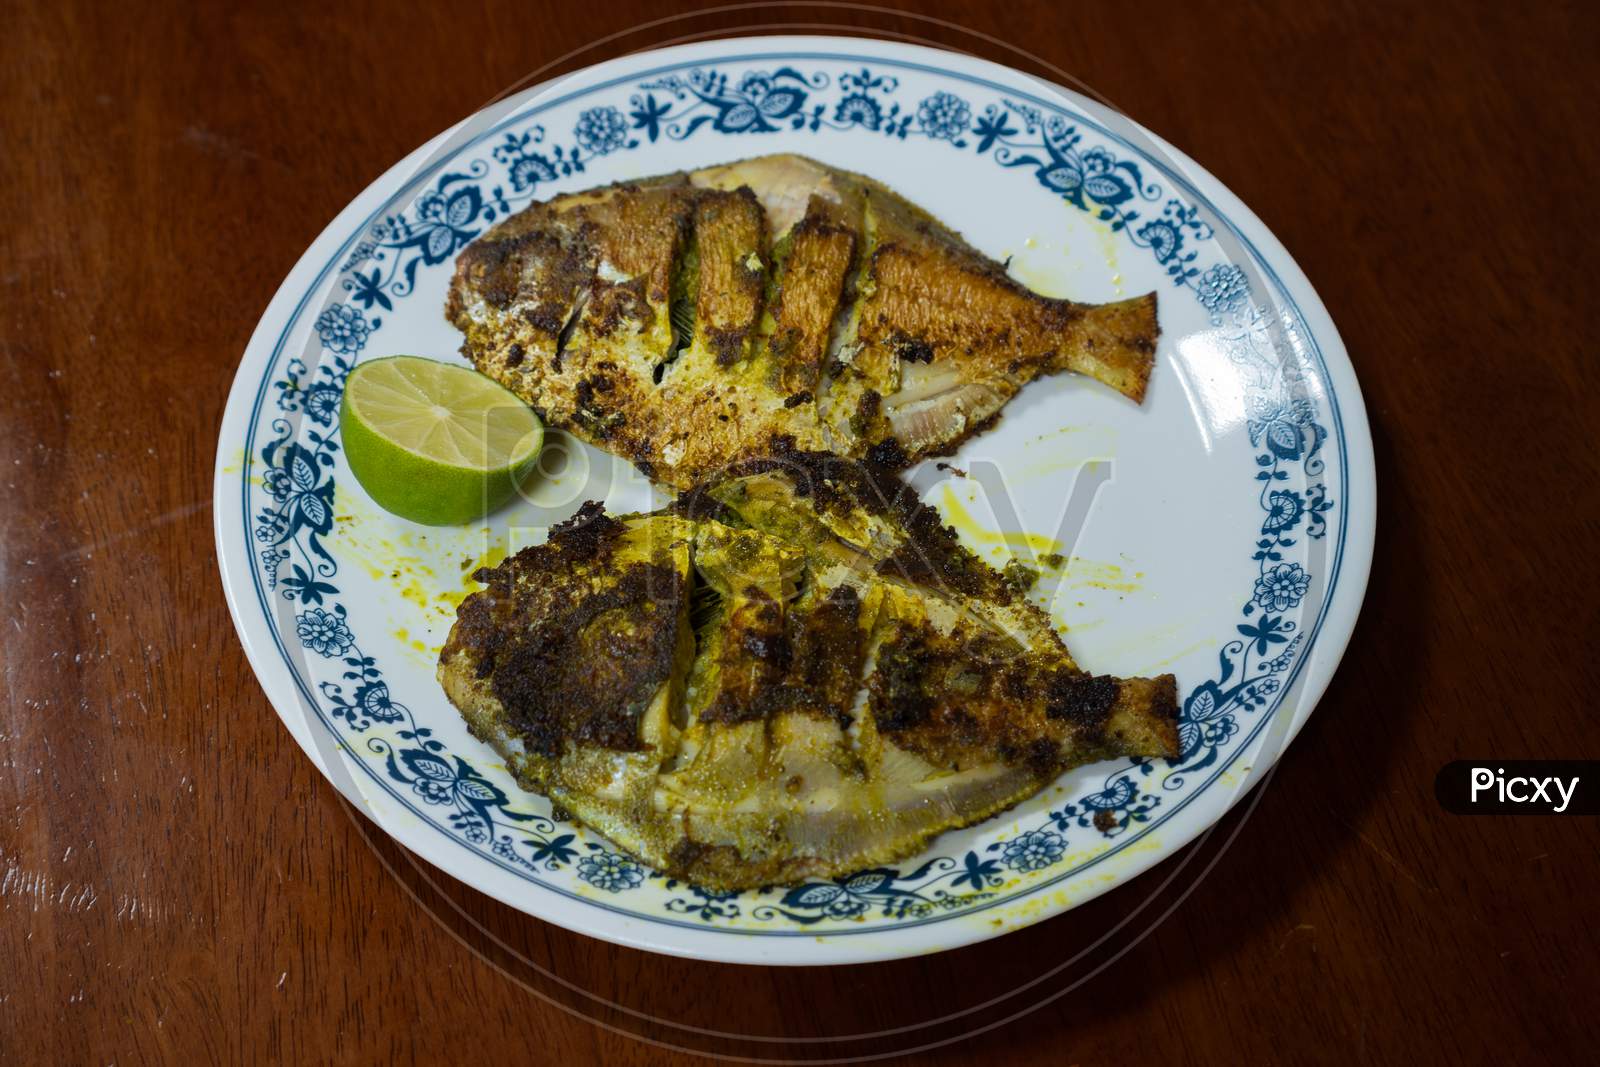 Fried Fish Served On A Plate